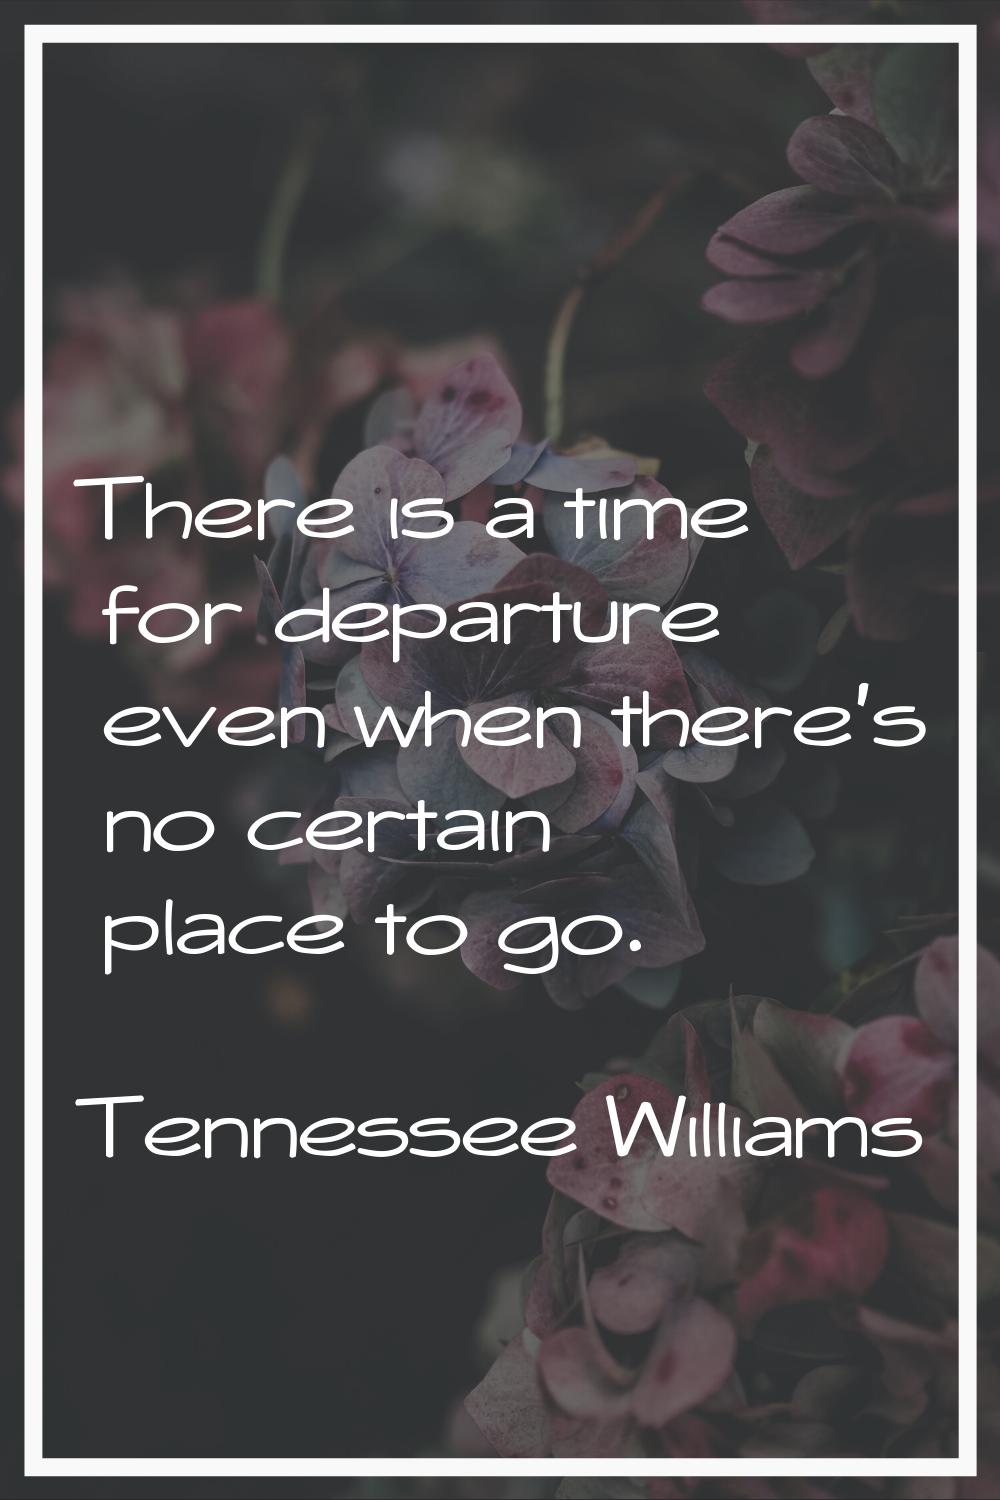 There is a time for departure even when there's no certain place to go.